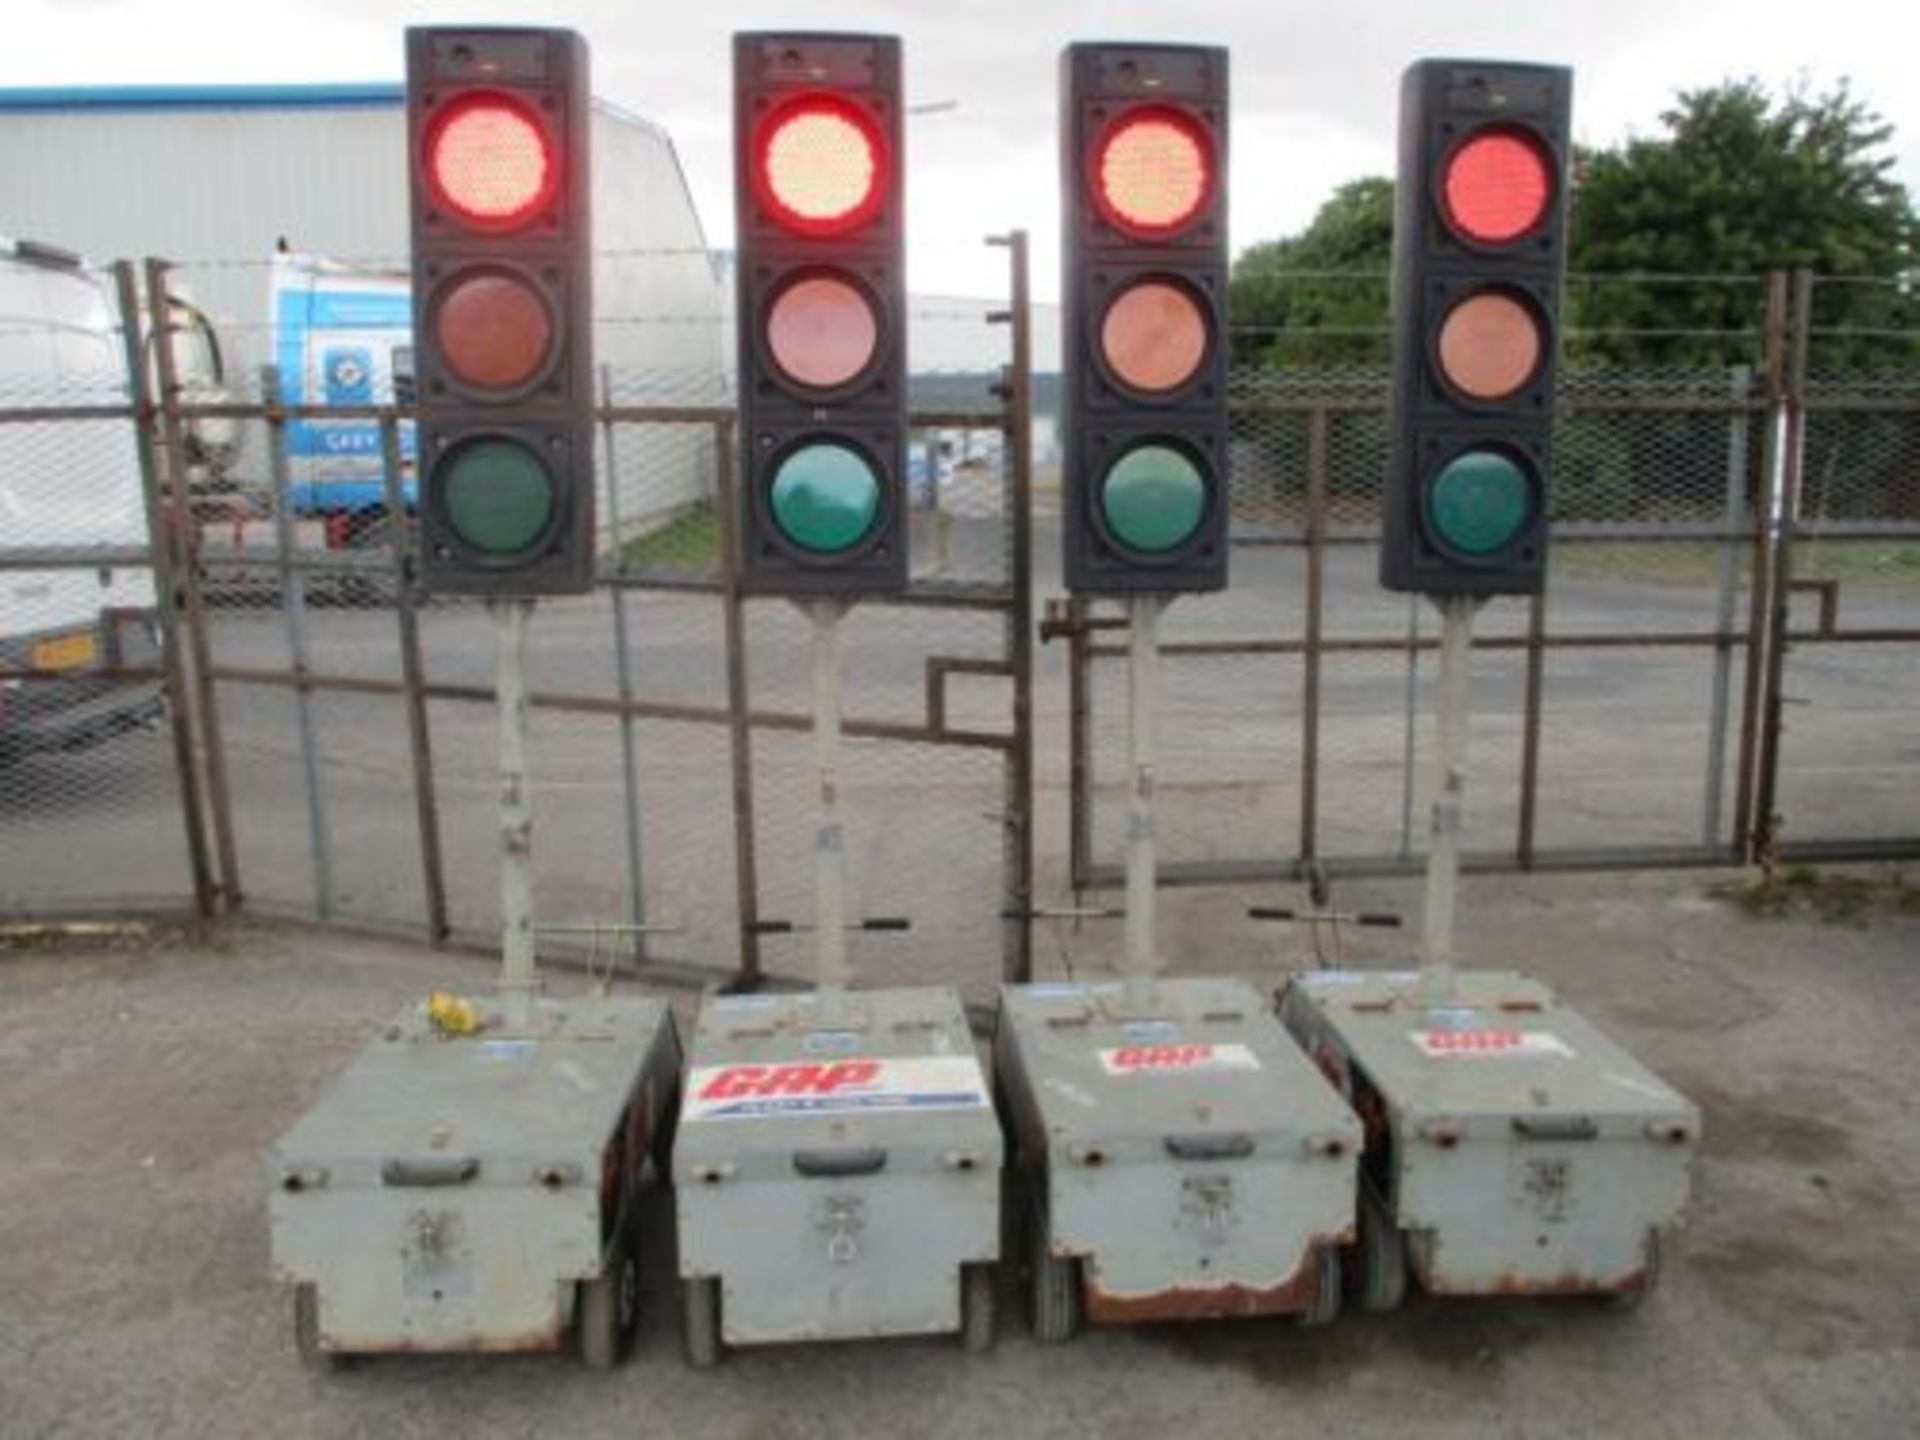 PIKE TRAFFIC LIGHTS XL2 RADIO LIGHT BATTERY 4 WAY MICRO SRL 2 DELIVERY ARRANGED - Image 4 of 8